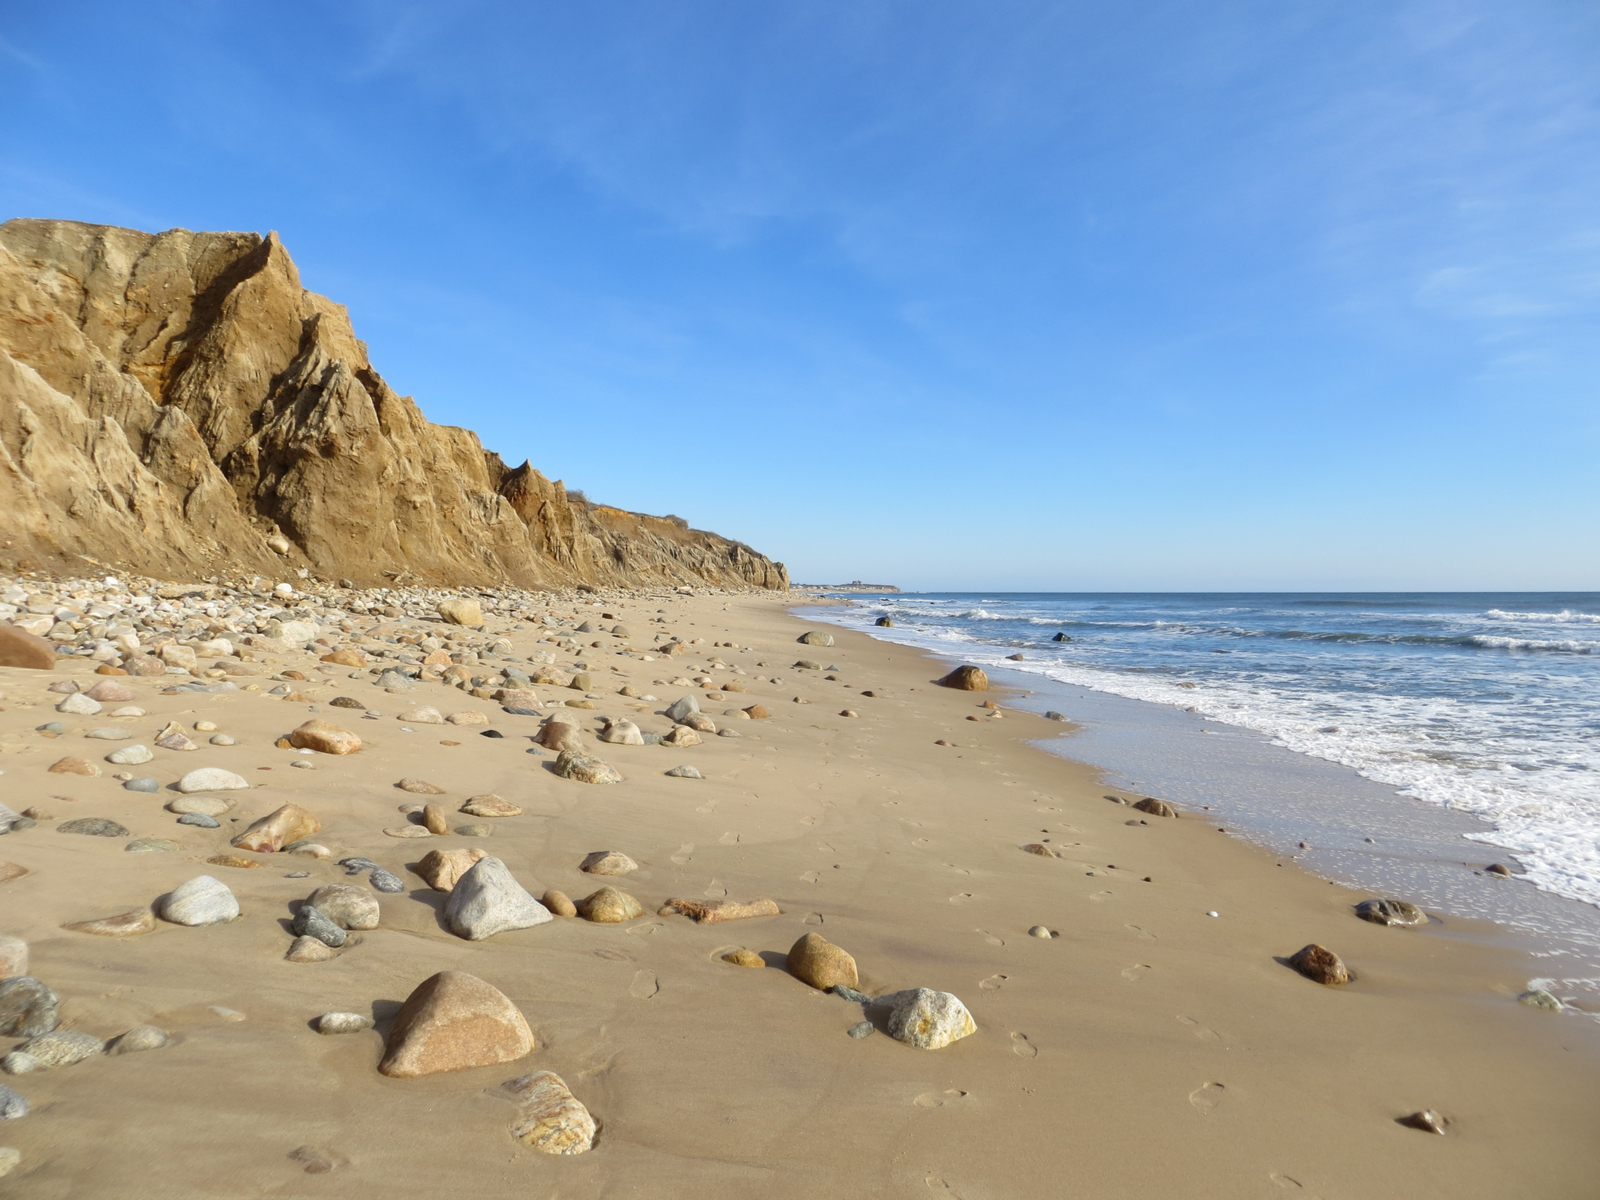 Cliffs and beach in Montauk, one of the best places to stay in the Hamptons